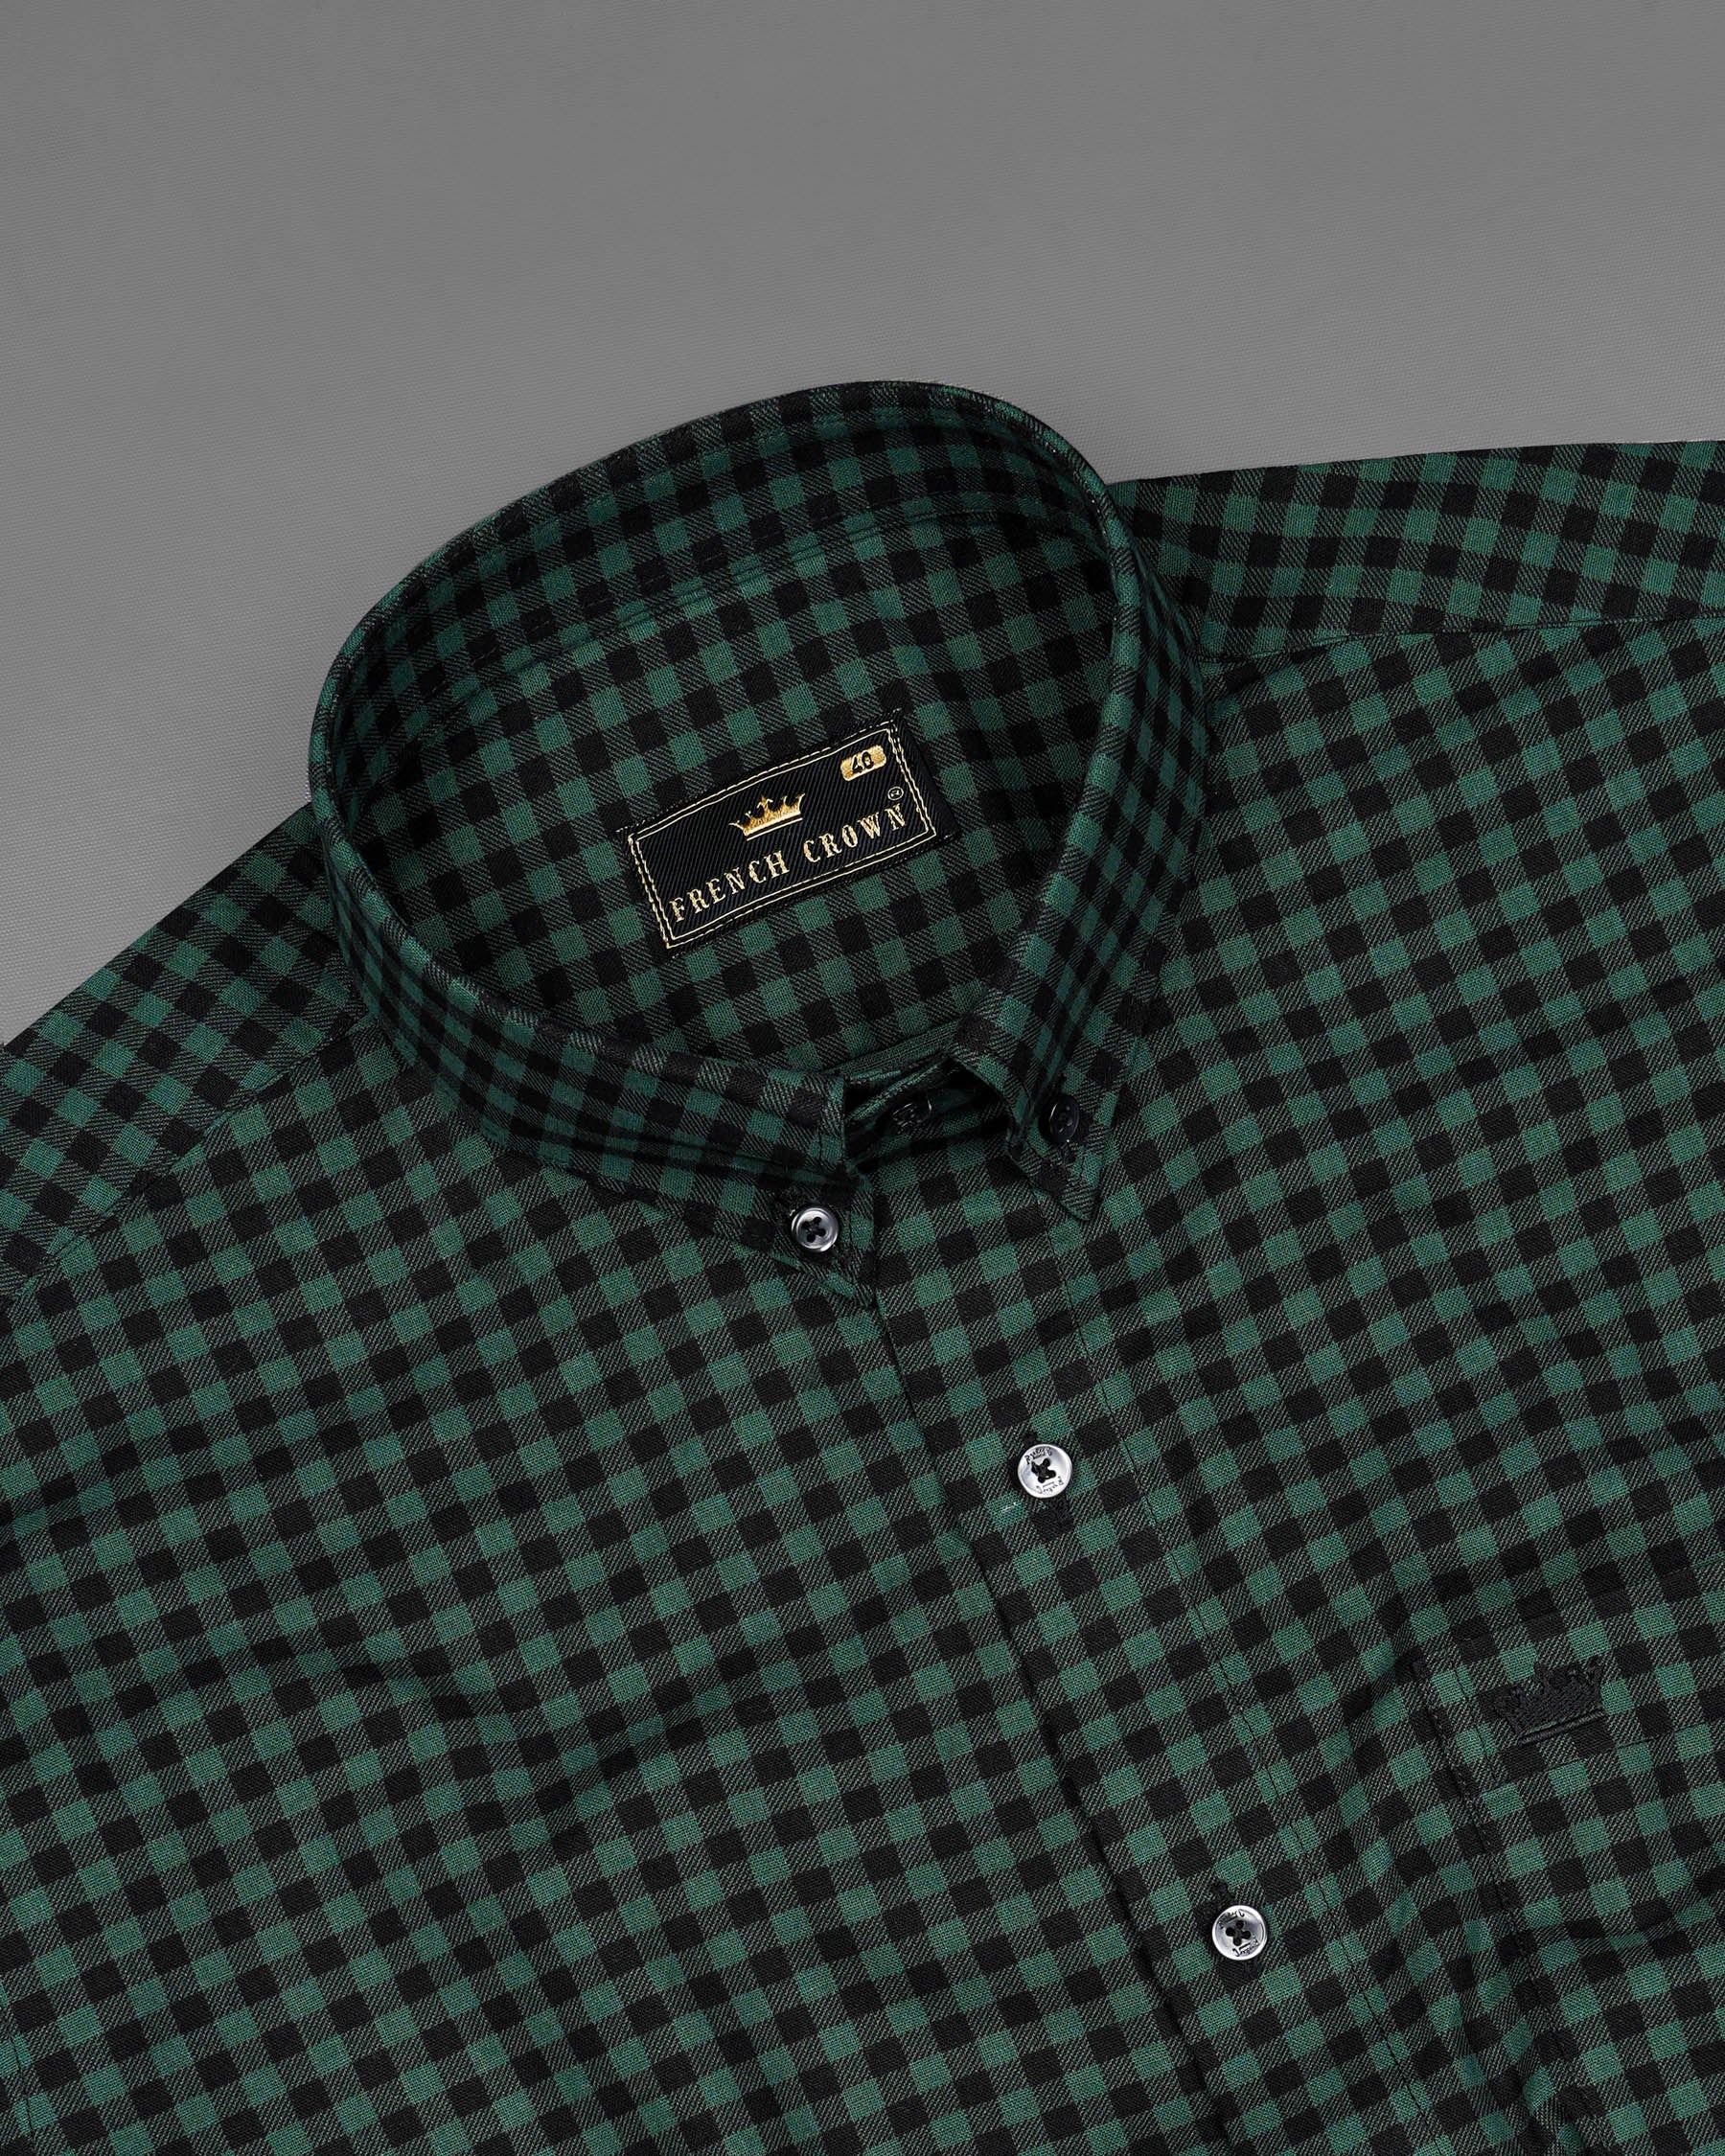 Outer Space Green With Back Gingham Checkered Twill Premium Cotton Shirt 7761-BD-BLK-38, 7761-BD-BLK-H-38, 7761-BD-BLK-39, 7761-BD-BLK-H-39, 7761-BD-BLK-40, 7761-BD-BLK-H-40, 7761-BD-BLK-42, 7761-BD-BLK-H-42, 7761-BD-BLK-44, 7761-BD-BLK-H-44, 7761-BD-BLK-46, 7761-BD-BLK-H-46, 7761-BD-BLK-48, 7761-BD-BLK-H-48, 7761-BD-BLK-50, 7761-BD-BLK-H-50, 7761-BD-BLK-52, 7761-BD-BLK-H-52